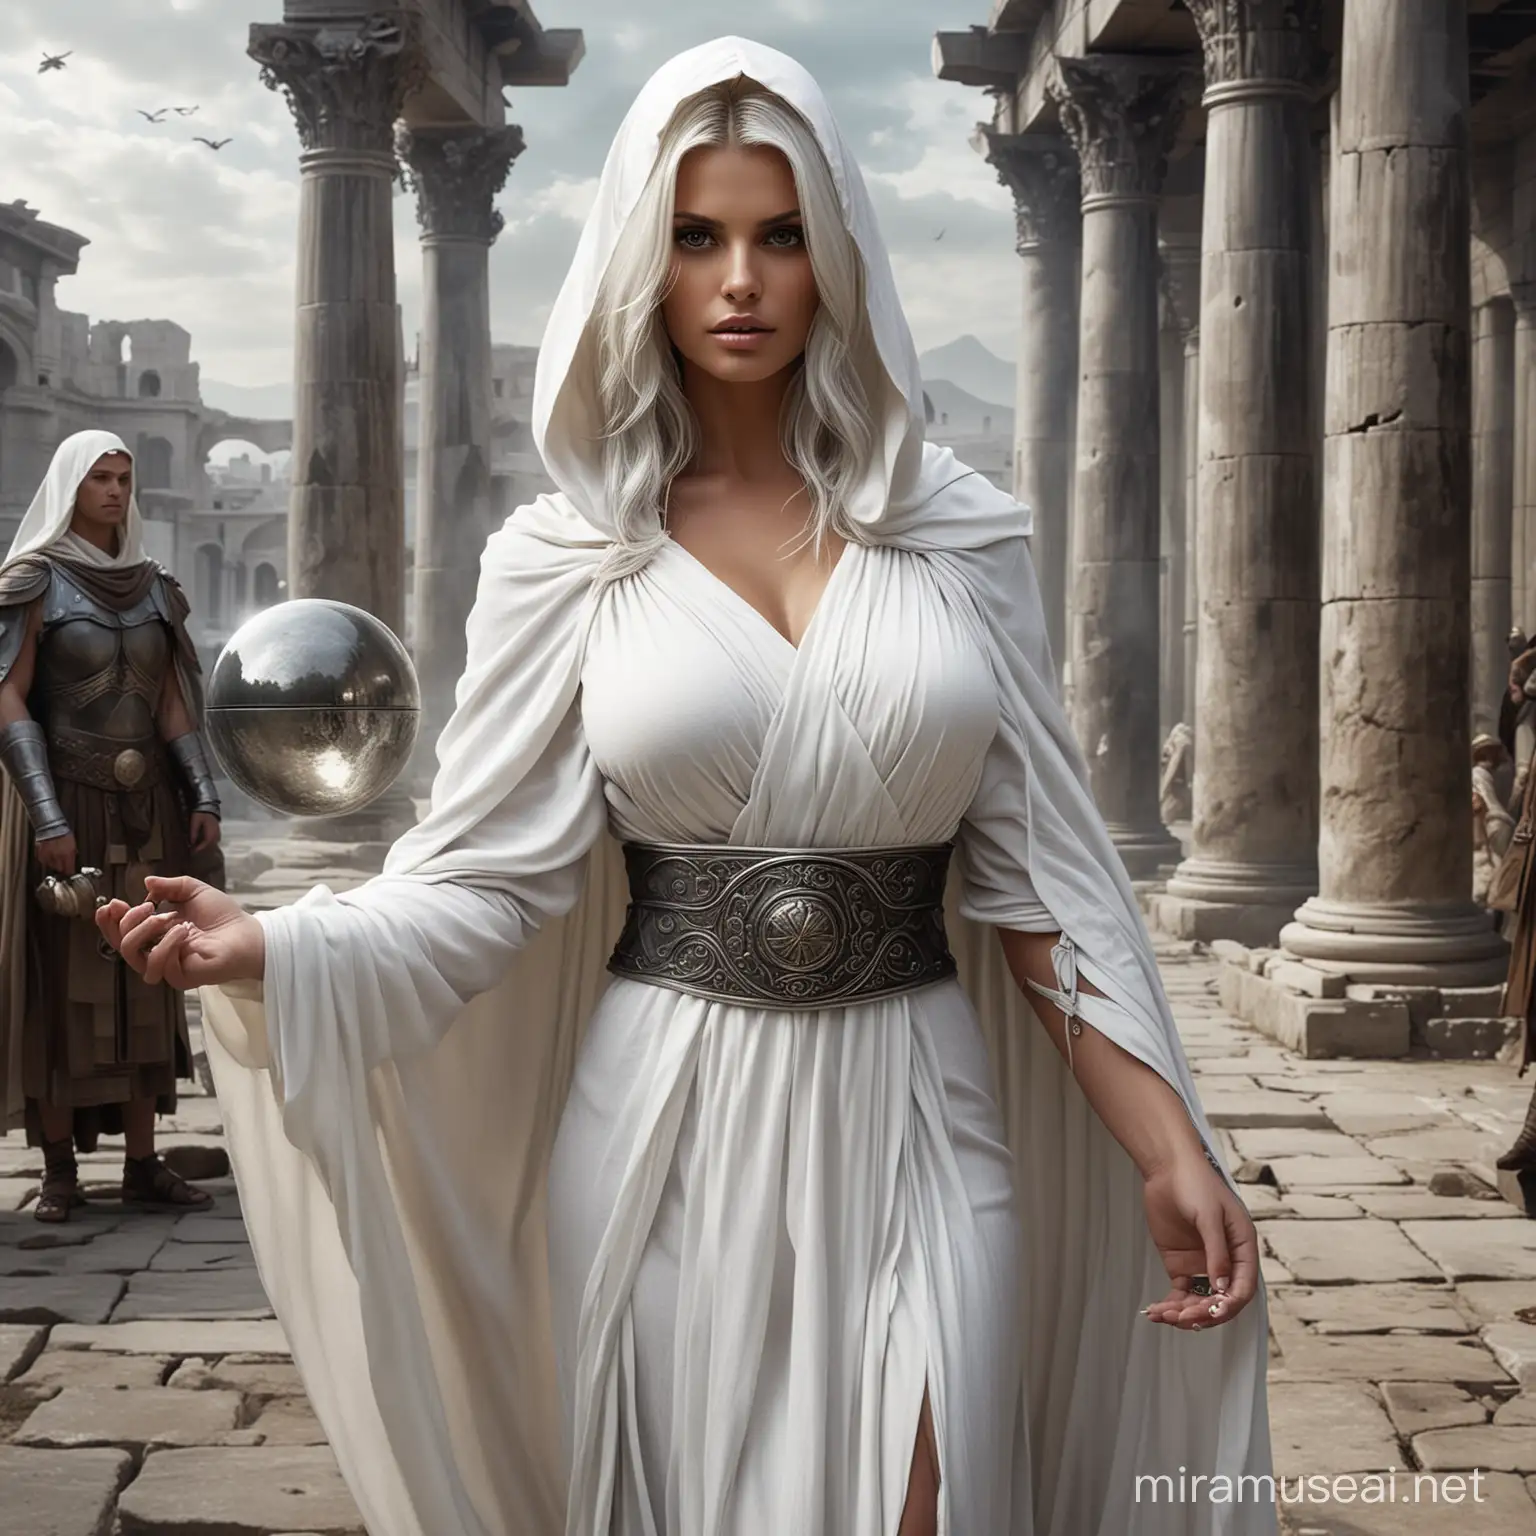  female Aasimar, muscular build, face looks like jessica simpson, long dark gray hair, holding an opaque dark orb in both hands, wearing a white long ancient roman toga with cape and hood, silver waistband, roman sandles, medieval battlefield in background, digital art